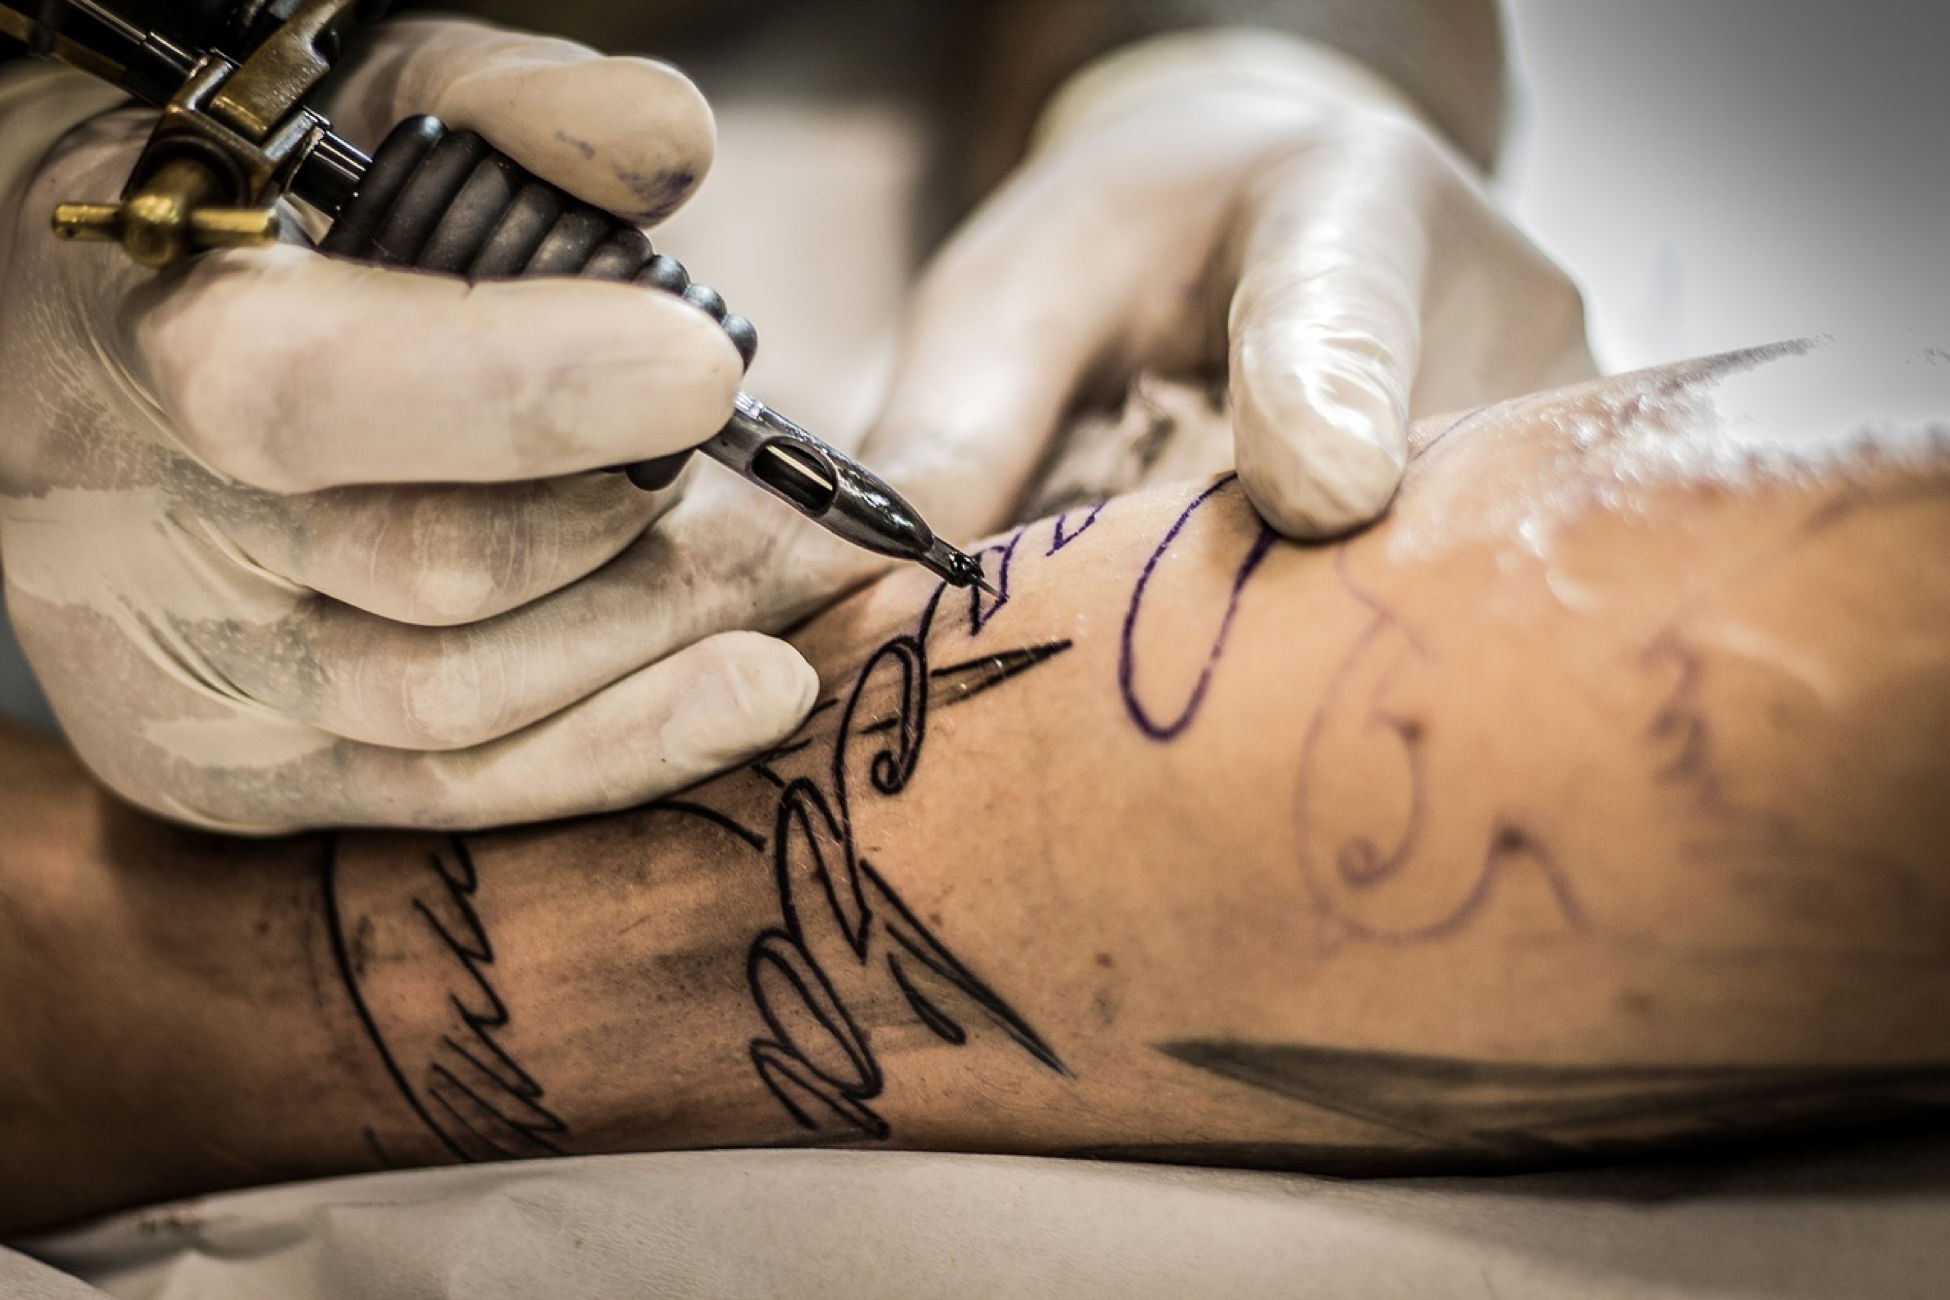 Tattoo Etiquette Quick Guide: Do's and Don'ts for Tattoo Customers -  Controse